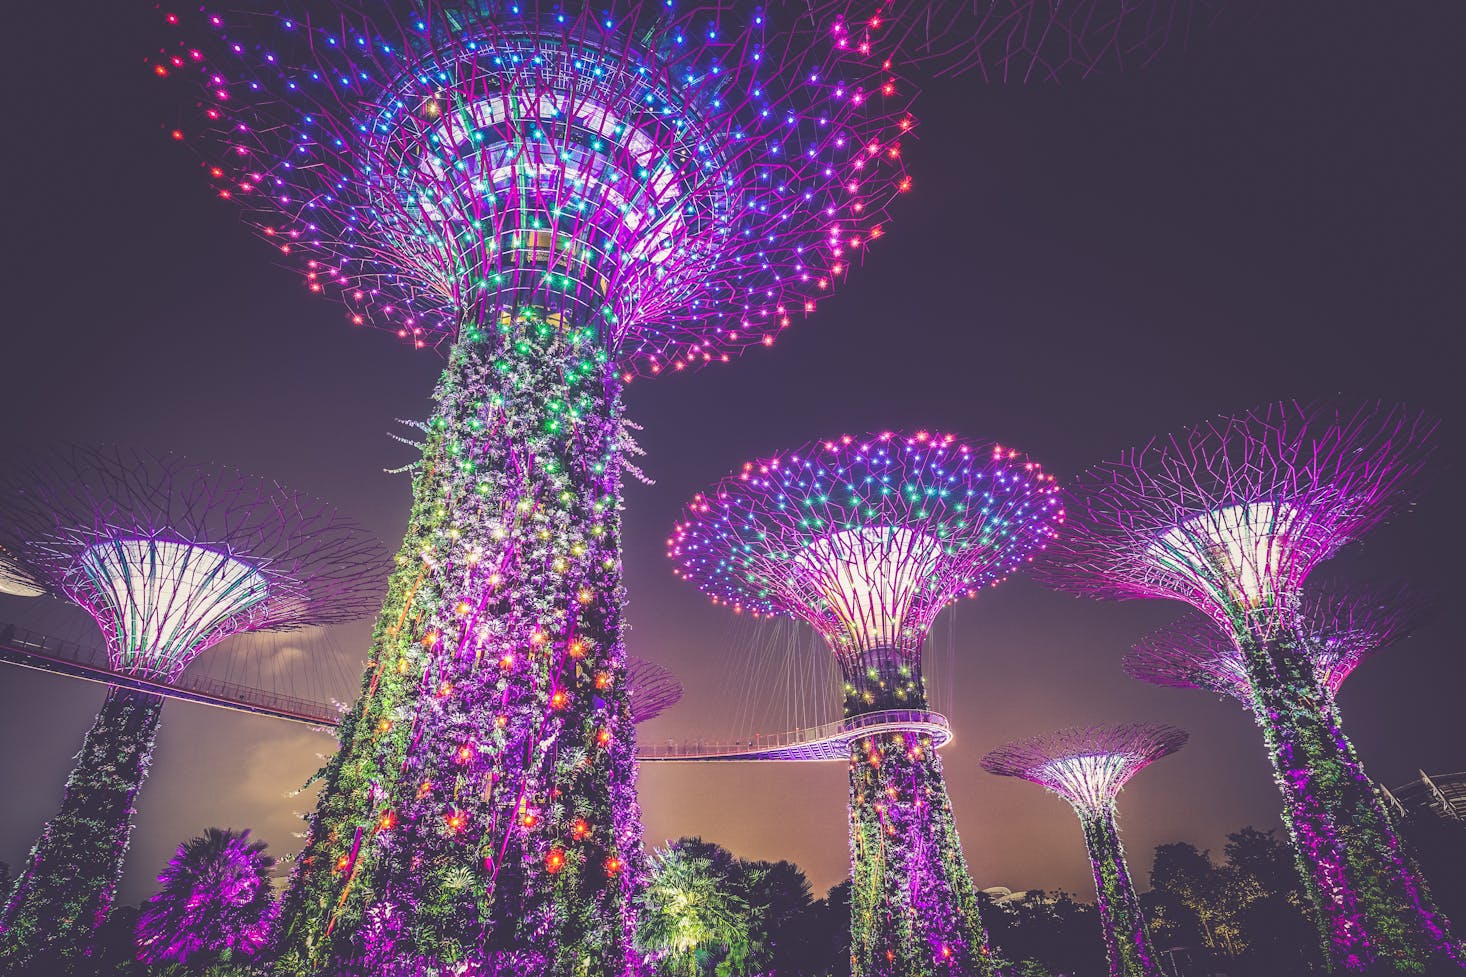 lighted towers at Gardens by the Bay in Singapore